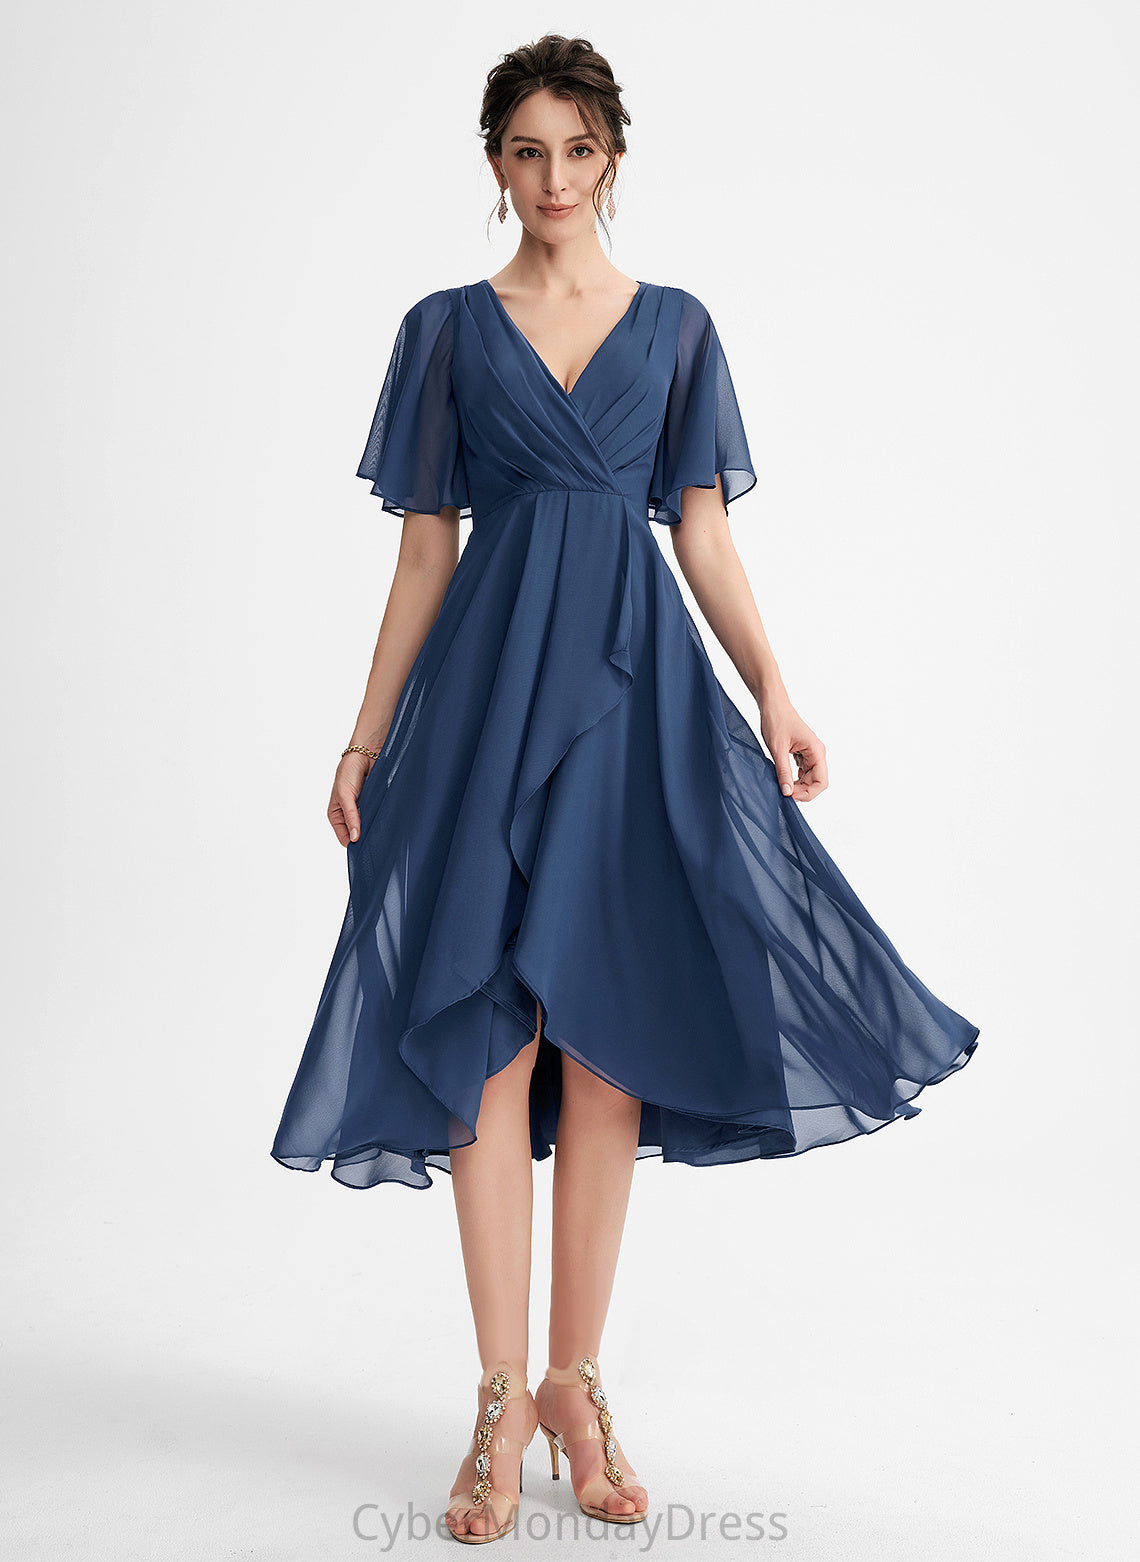 A-Line Chiffon With Cocktail Dresses Cocktail V-neck Ruffle Asymmetrical Rebecca Dress